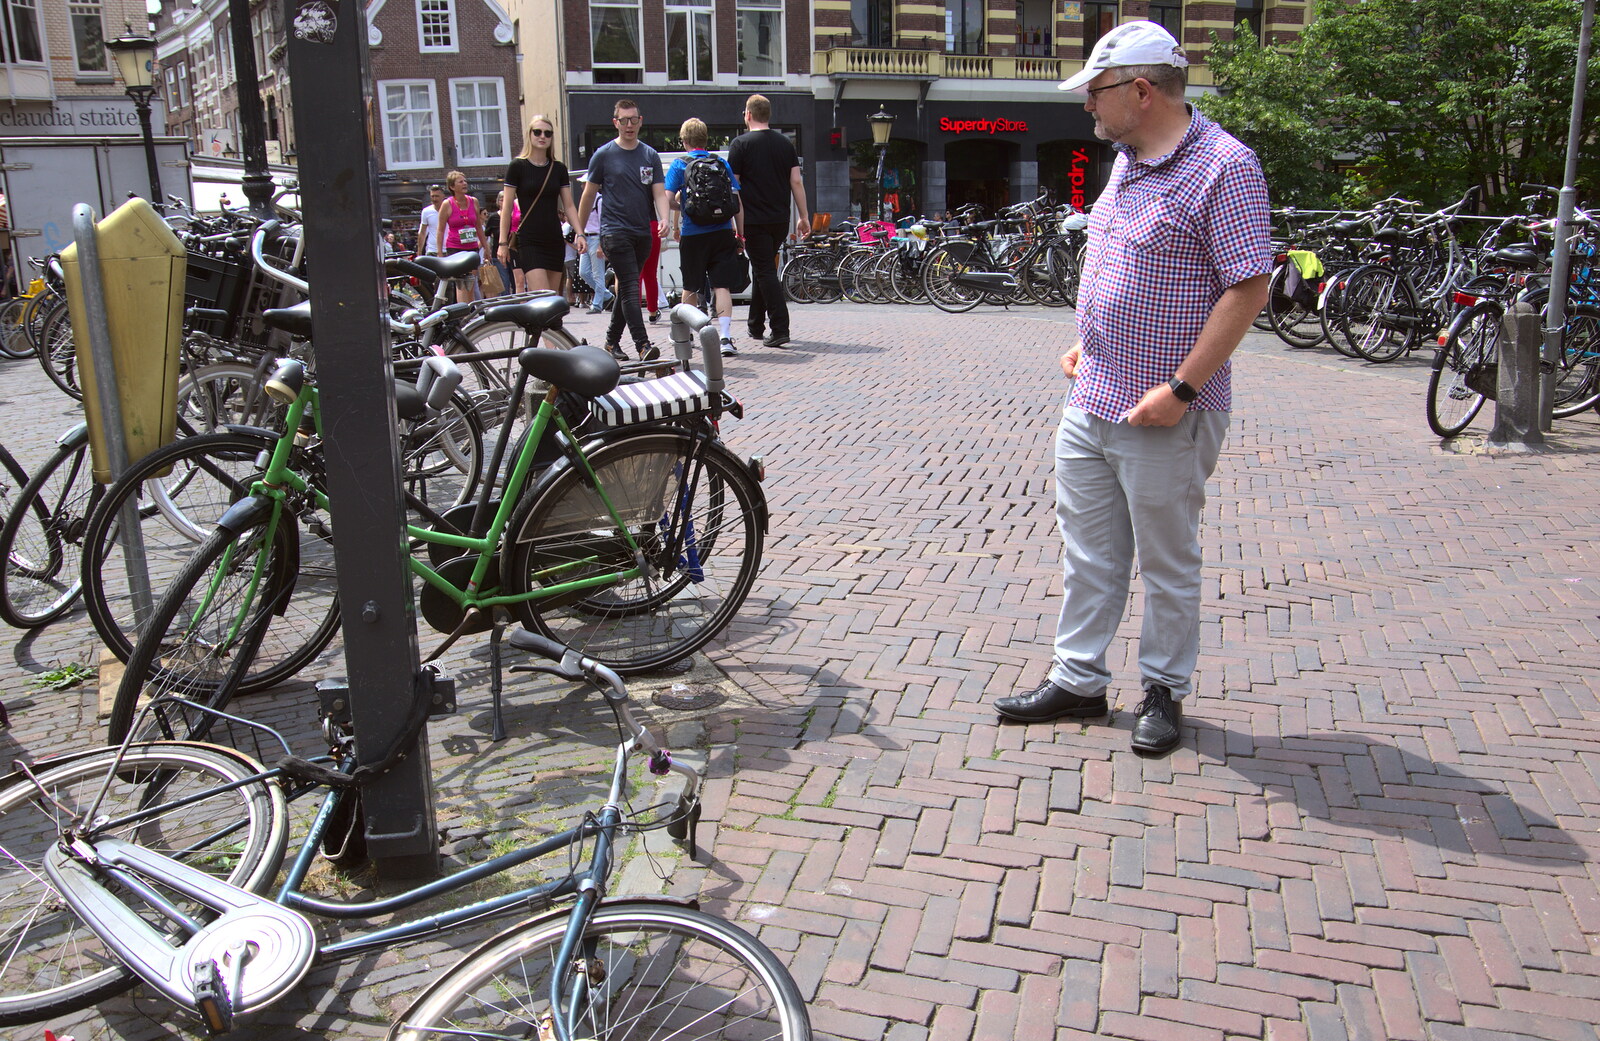 Hamish looks at bikes from A Postcard from Utrecht, Nederlands - 10th June 2018